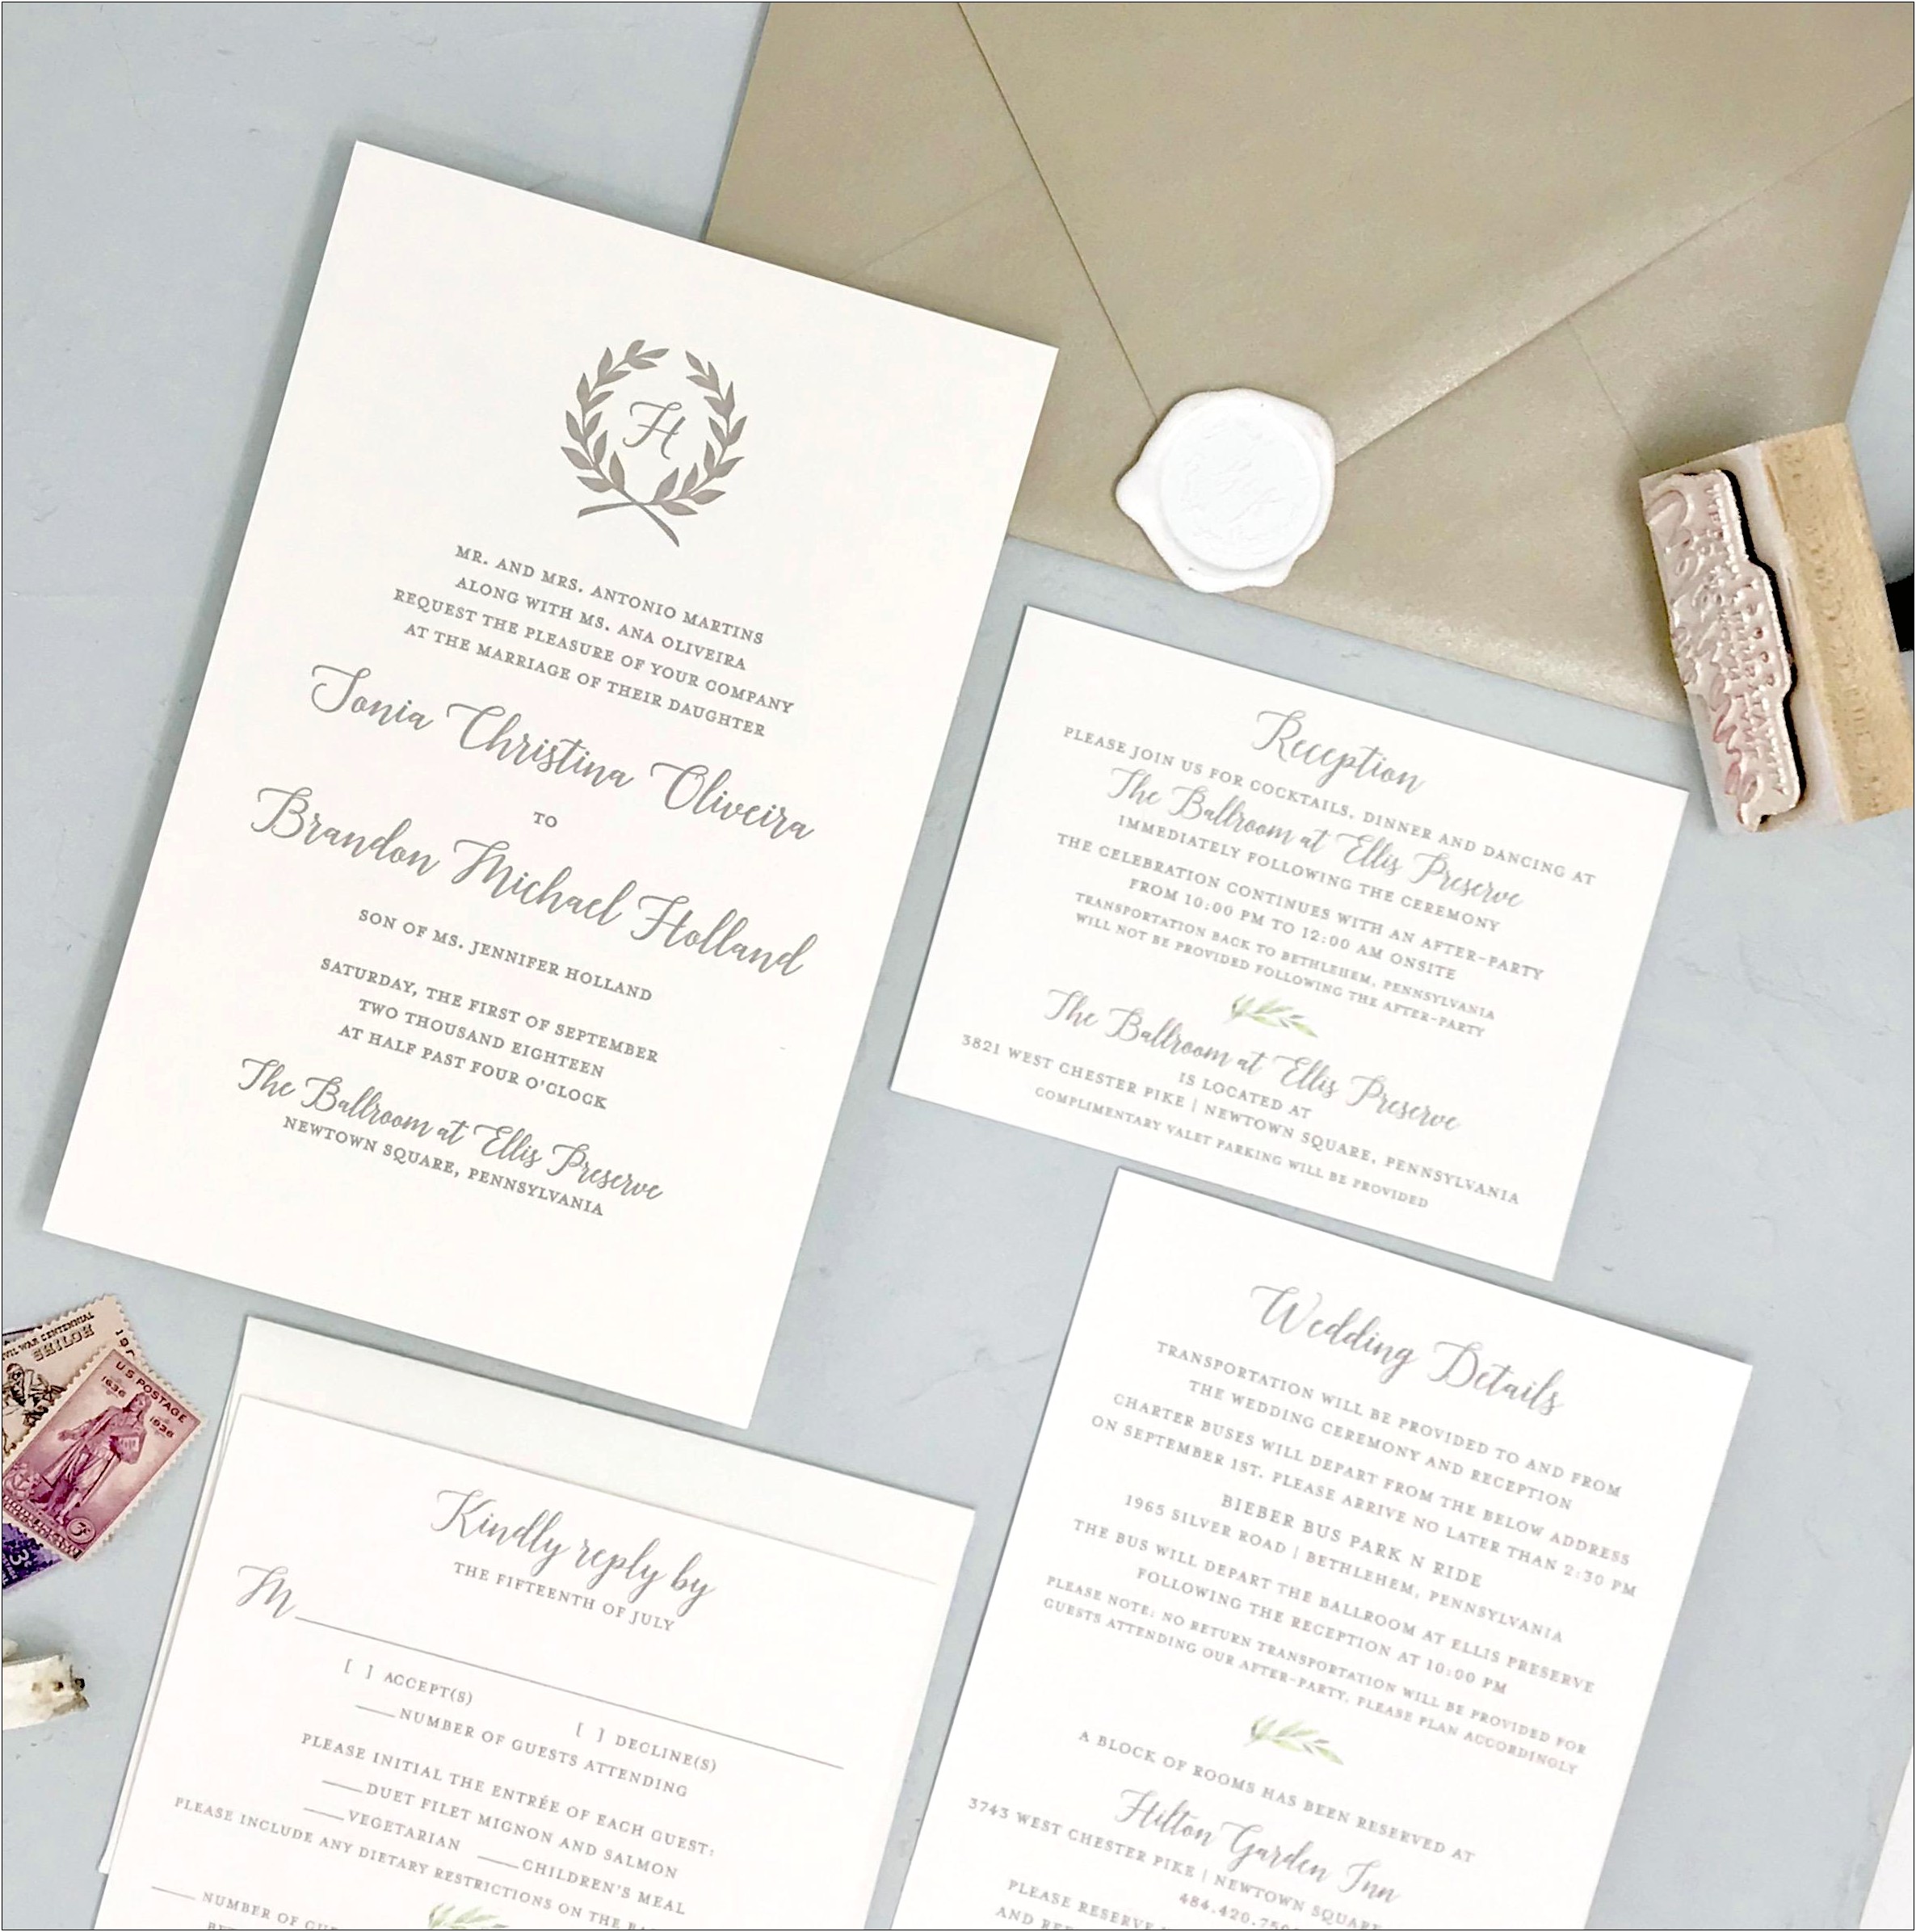 Type Of Paper Used For Wedding Invitations